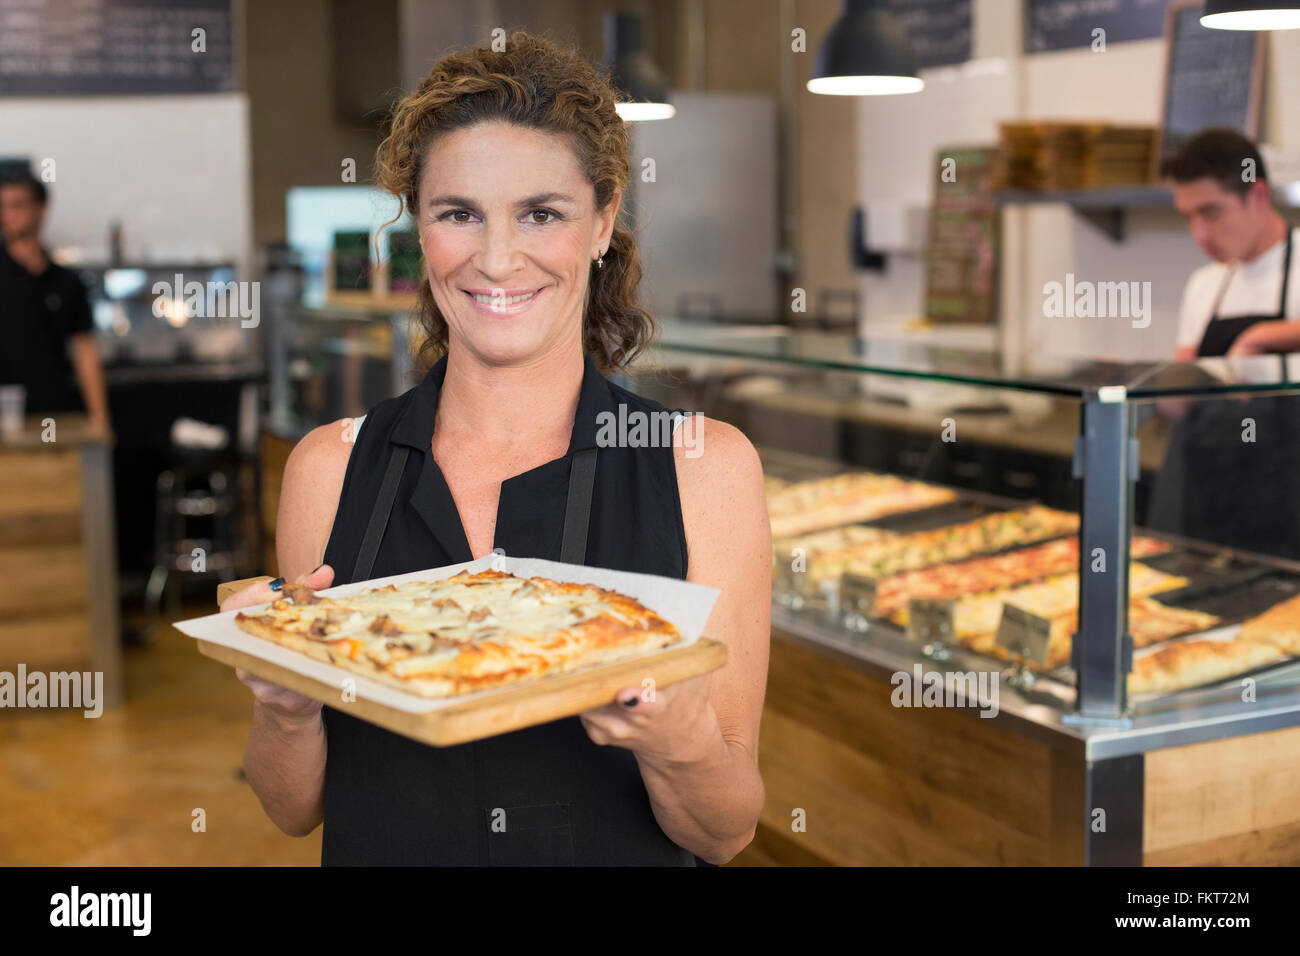 Server holding pizza in cafe Stock Photo